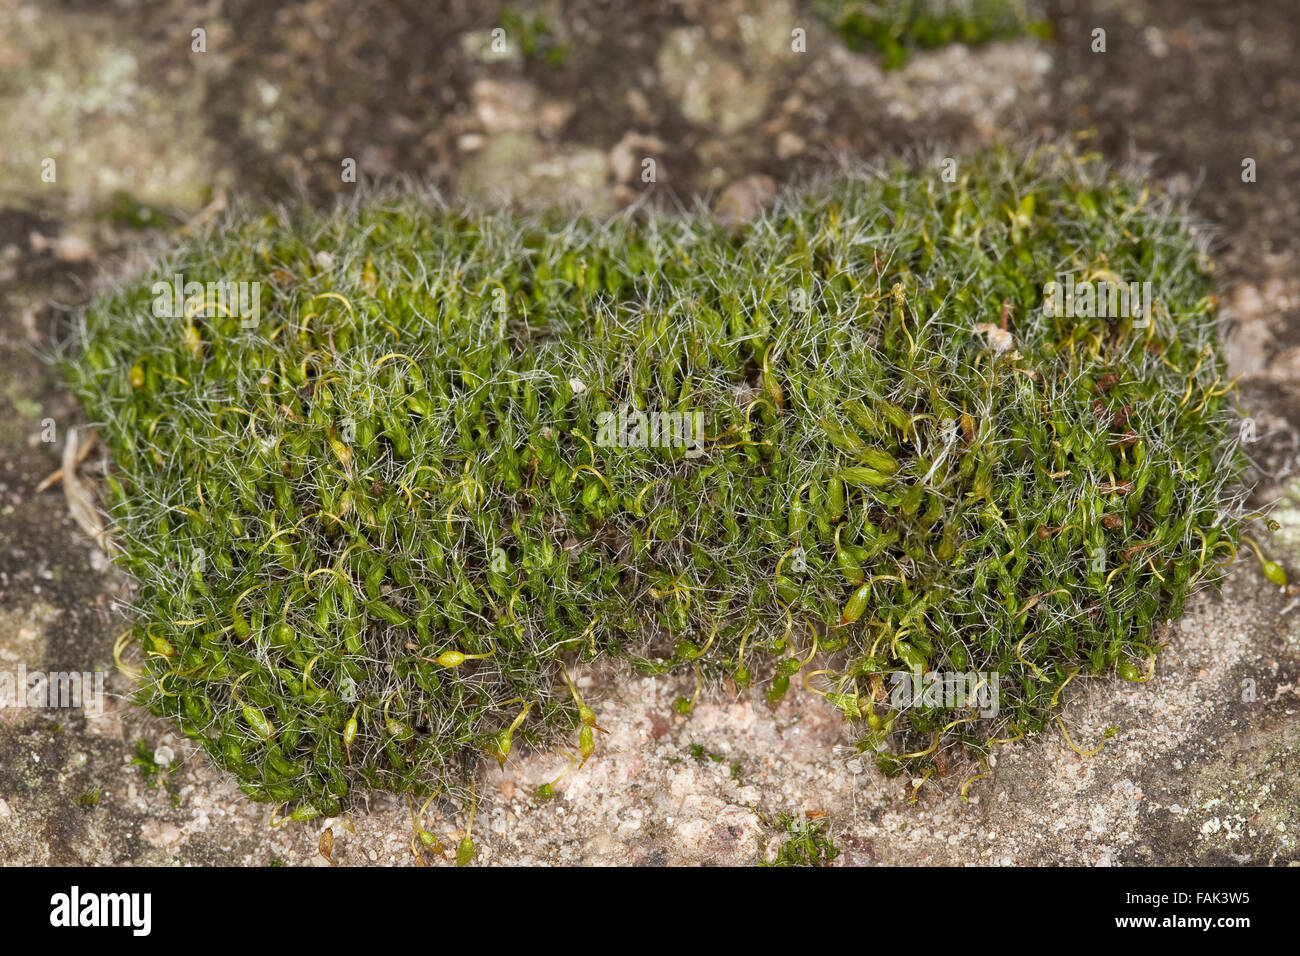 Pulvinate dry rock moss, Polster-Kissenmoos, Polsterkissenmoos, Gemeines Kissenmoos, Grimmia pulvinata, Grimmia en coussin Stock Photo